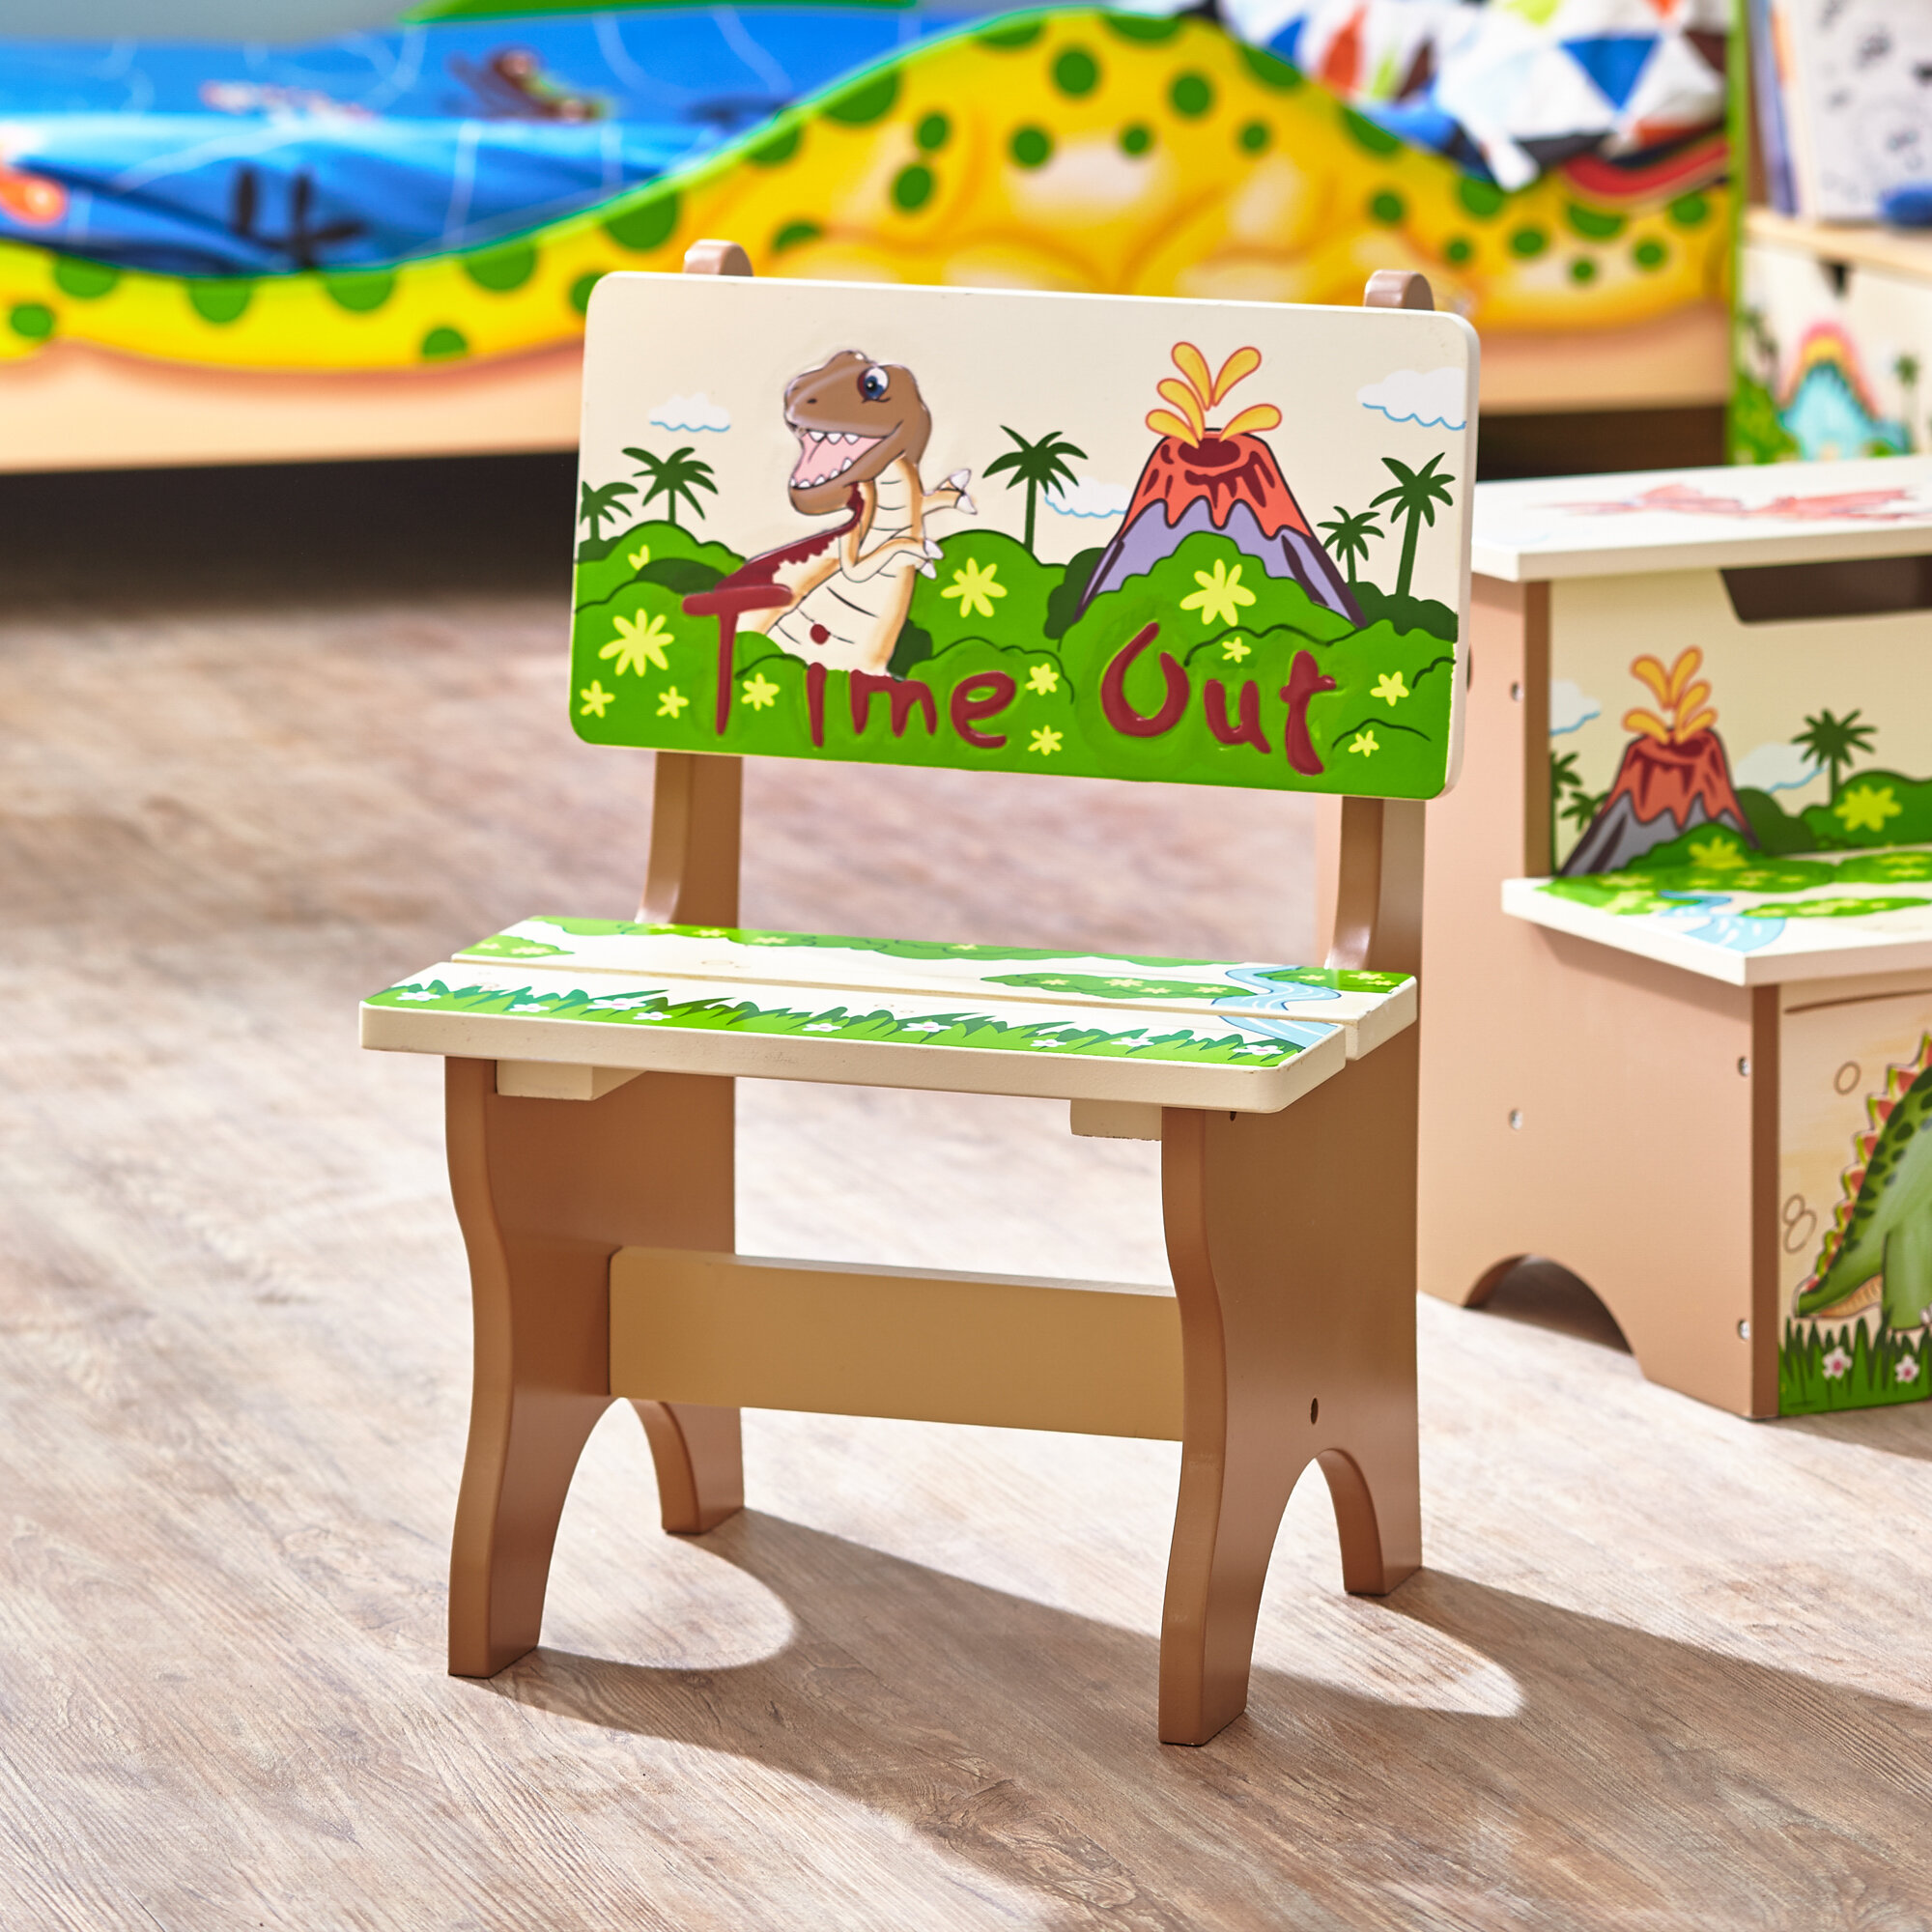 Dinosaur Kids Table & Chairs Perfect For Kids Who Love Dinosaurs! 